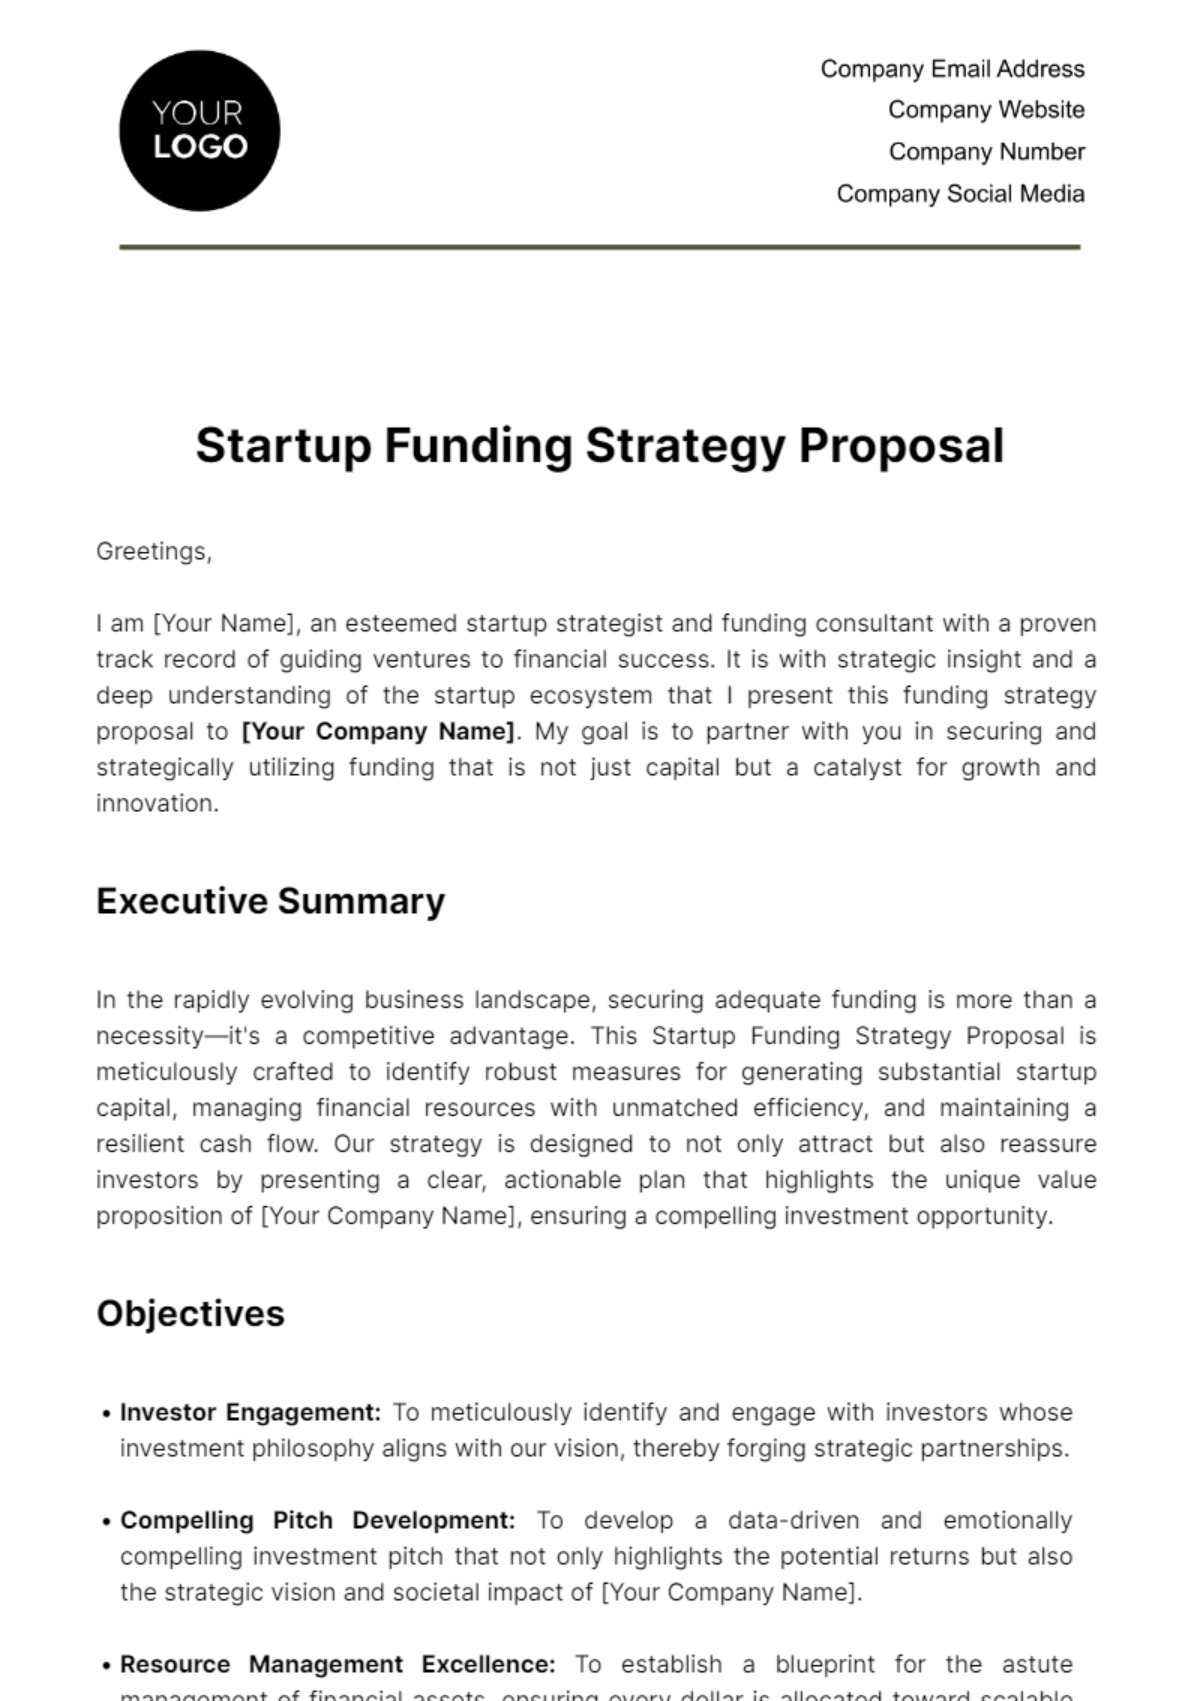 Free Startup Funding Strategy Proposal Template